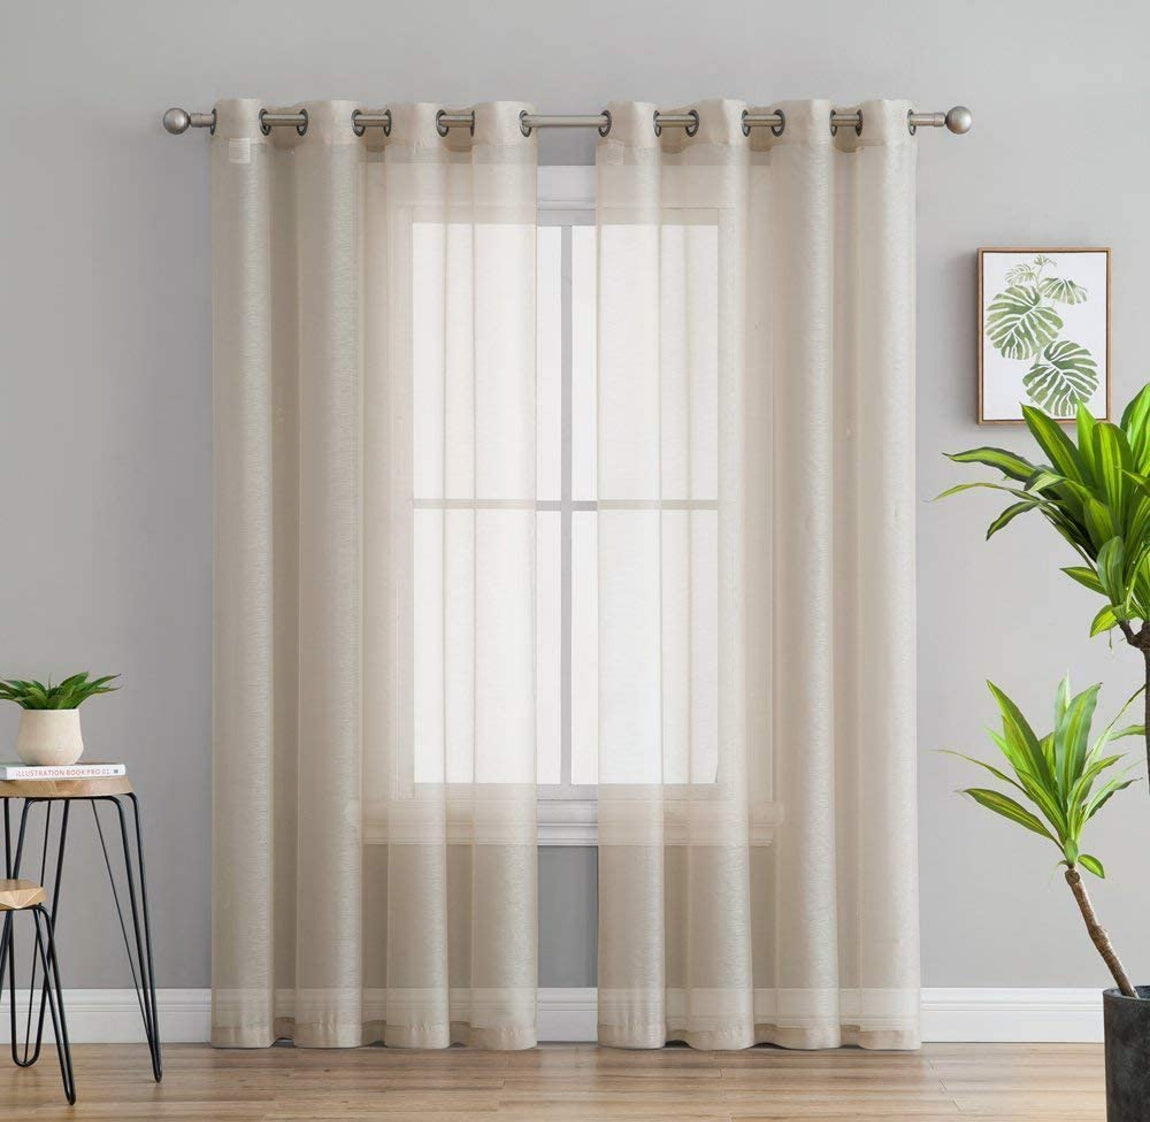 HLC.ME 2 Piece Semi Sheer Voile Window Treatment Curtain Grommet Panels for Bedroom & Living Room